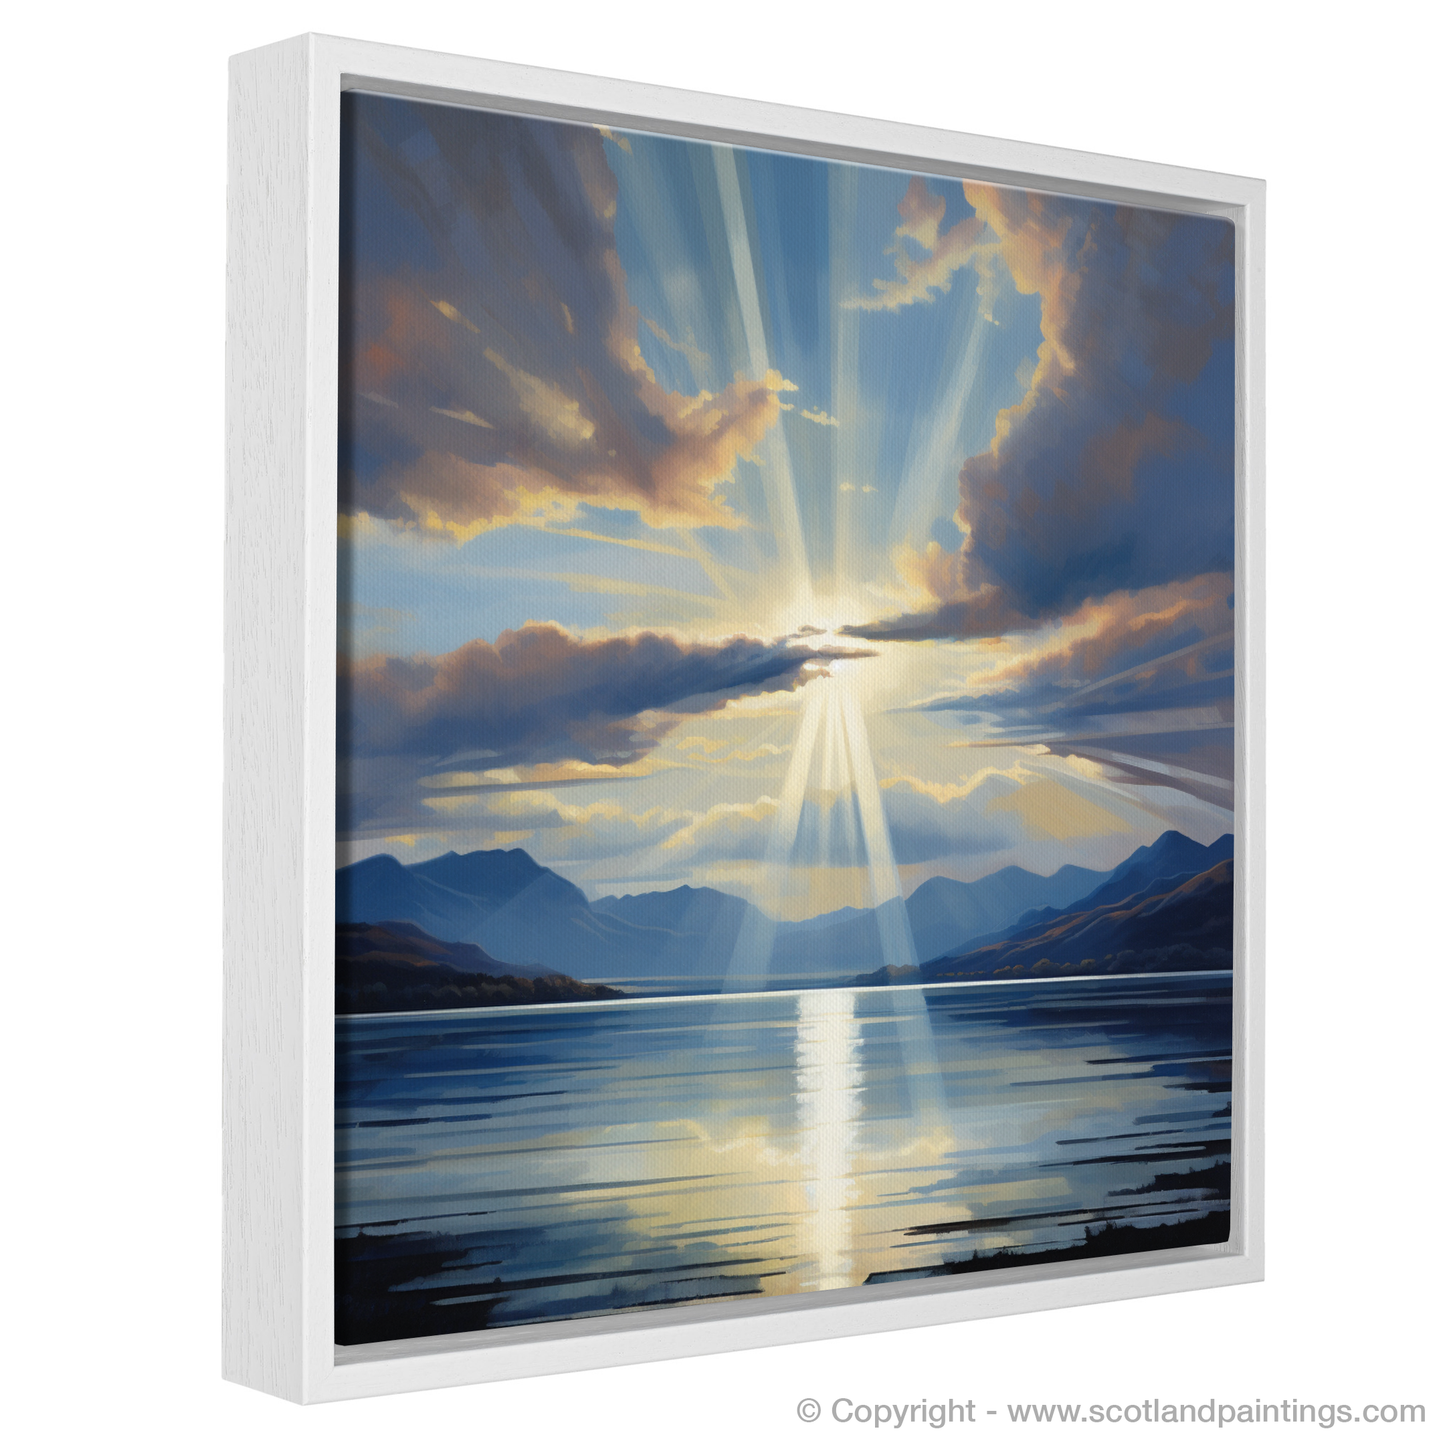 Painting and Art Print of Crepuscular rays above Loch Lomond entitled "Crepuscular Rays over Loch Lomond: A Celestial Glow".